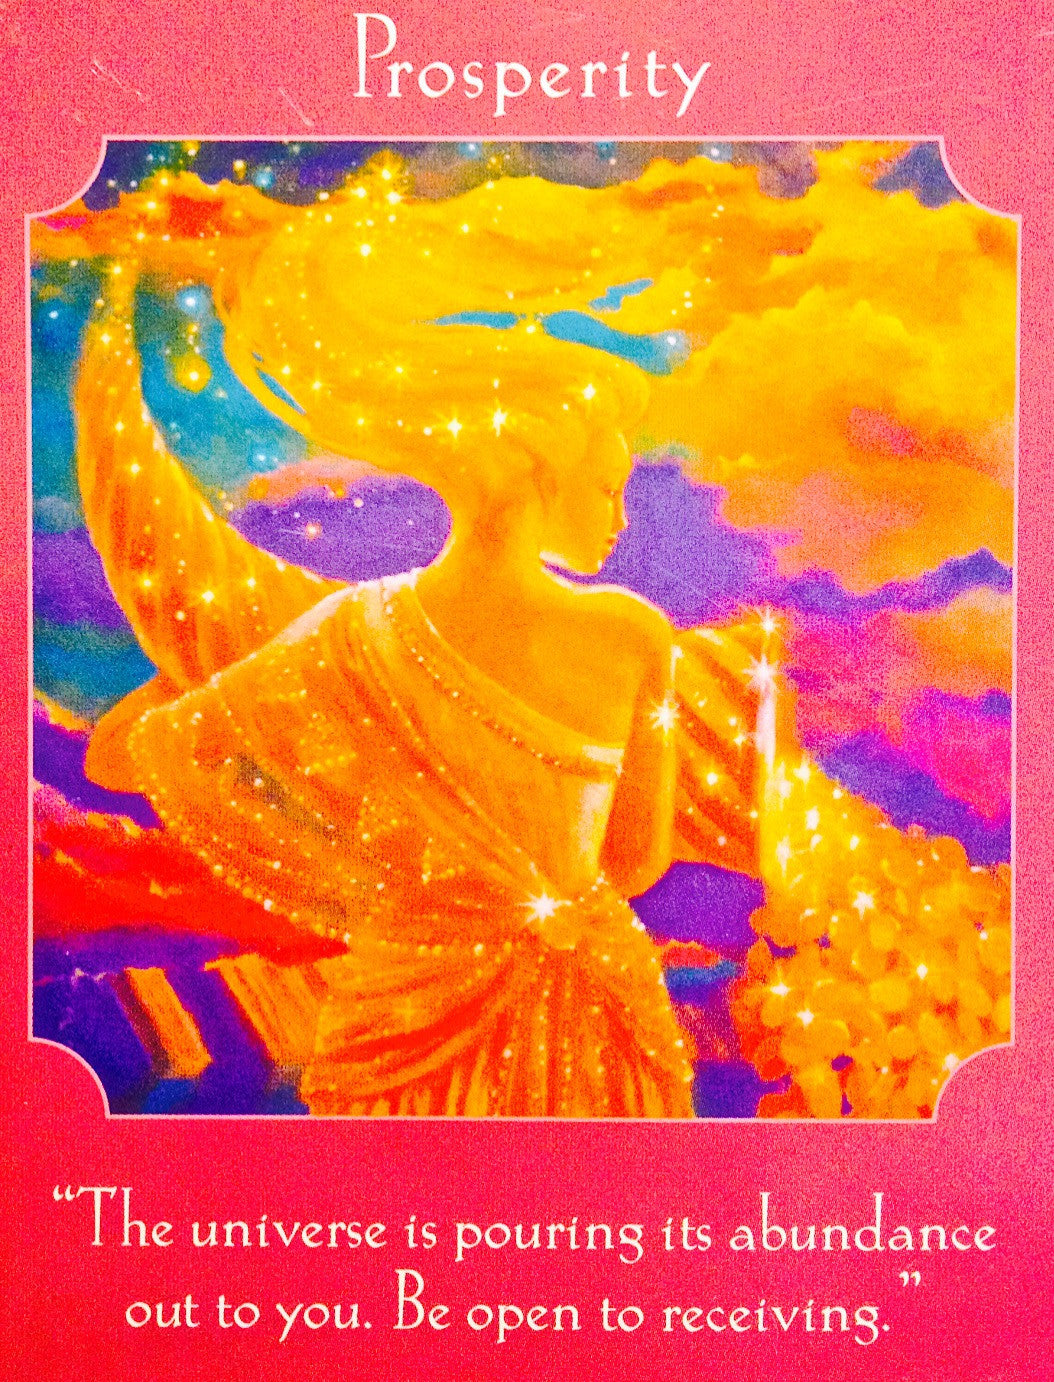 Abundantia ~ Prosperity: “The Universe is pouring its abundance out to you. Be open to receiving."